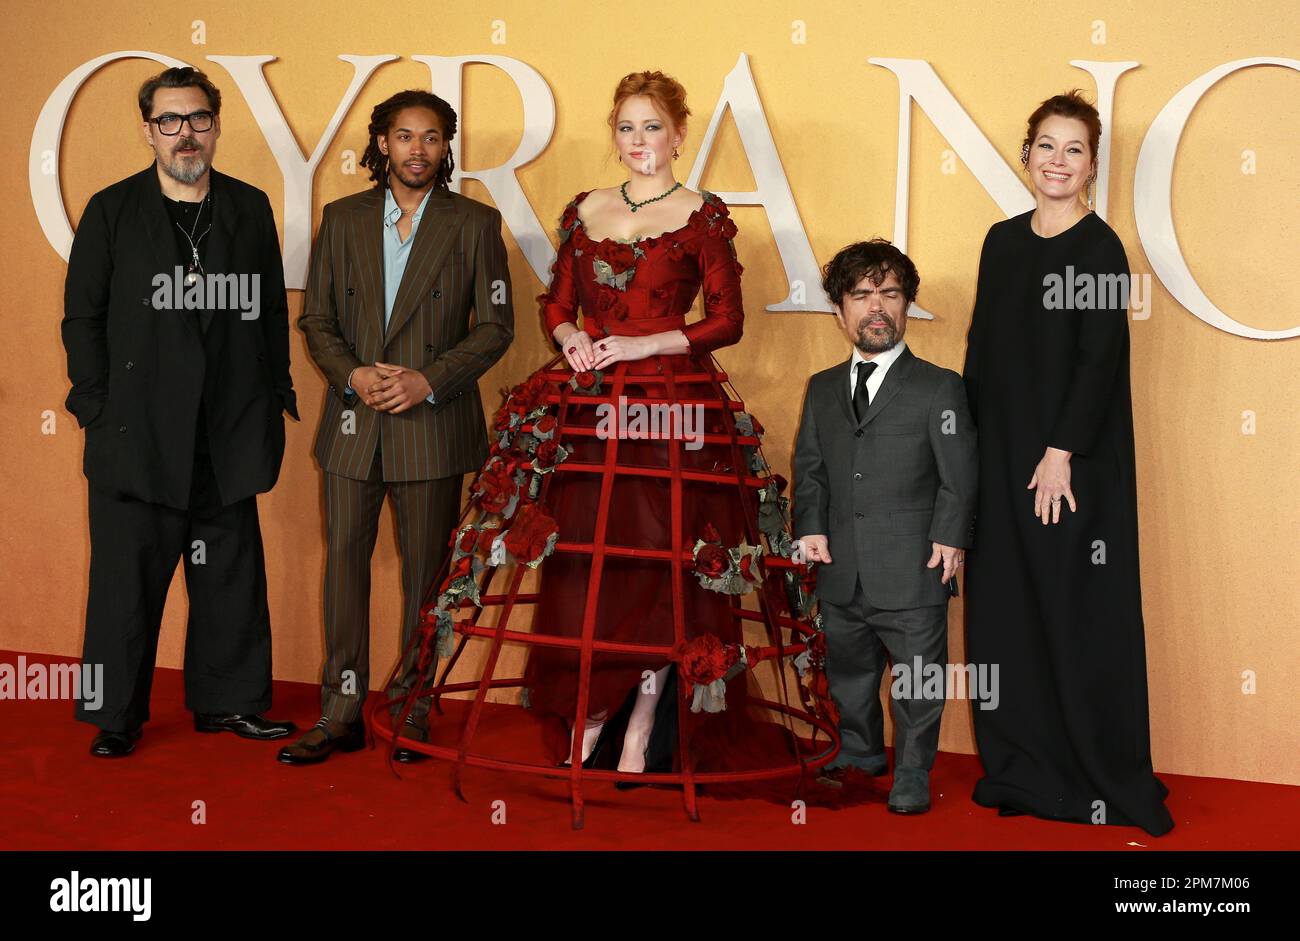 London, UK. 07th Dec, 2021. Joe Wright, Kelvin Harrison Jr, Hayley Bennett, Peter Dinklage and Erica Schmidt attend the UK Premiere of 'CYRANO' at Odeon Luxe Leicester Square in London. (Photo by Fred Duval/SOPA Images/Sipa USA) Credit: Sipa USA/Alamy Live News Stock Photo